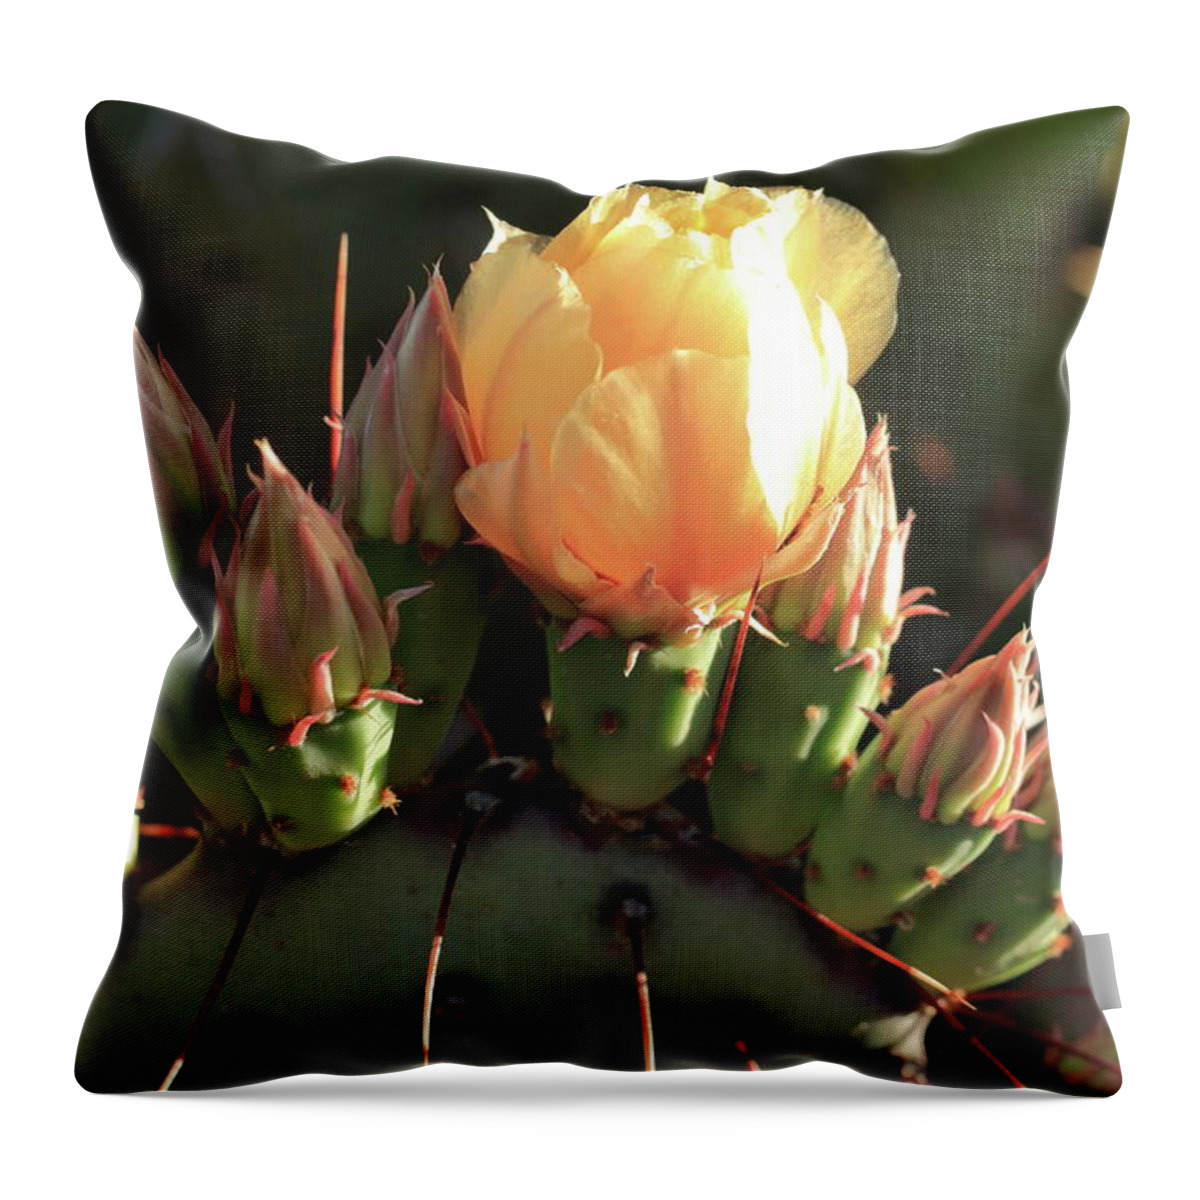 Flower Throw Pillow featuring the photograph Prickly Pear Cactus by David Diaz